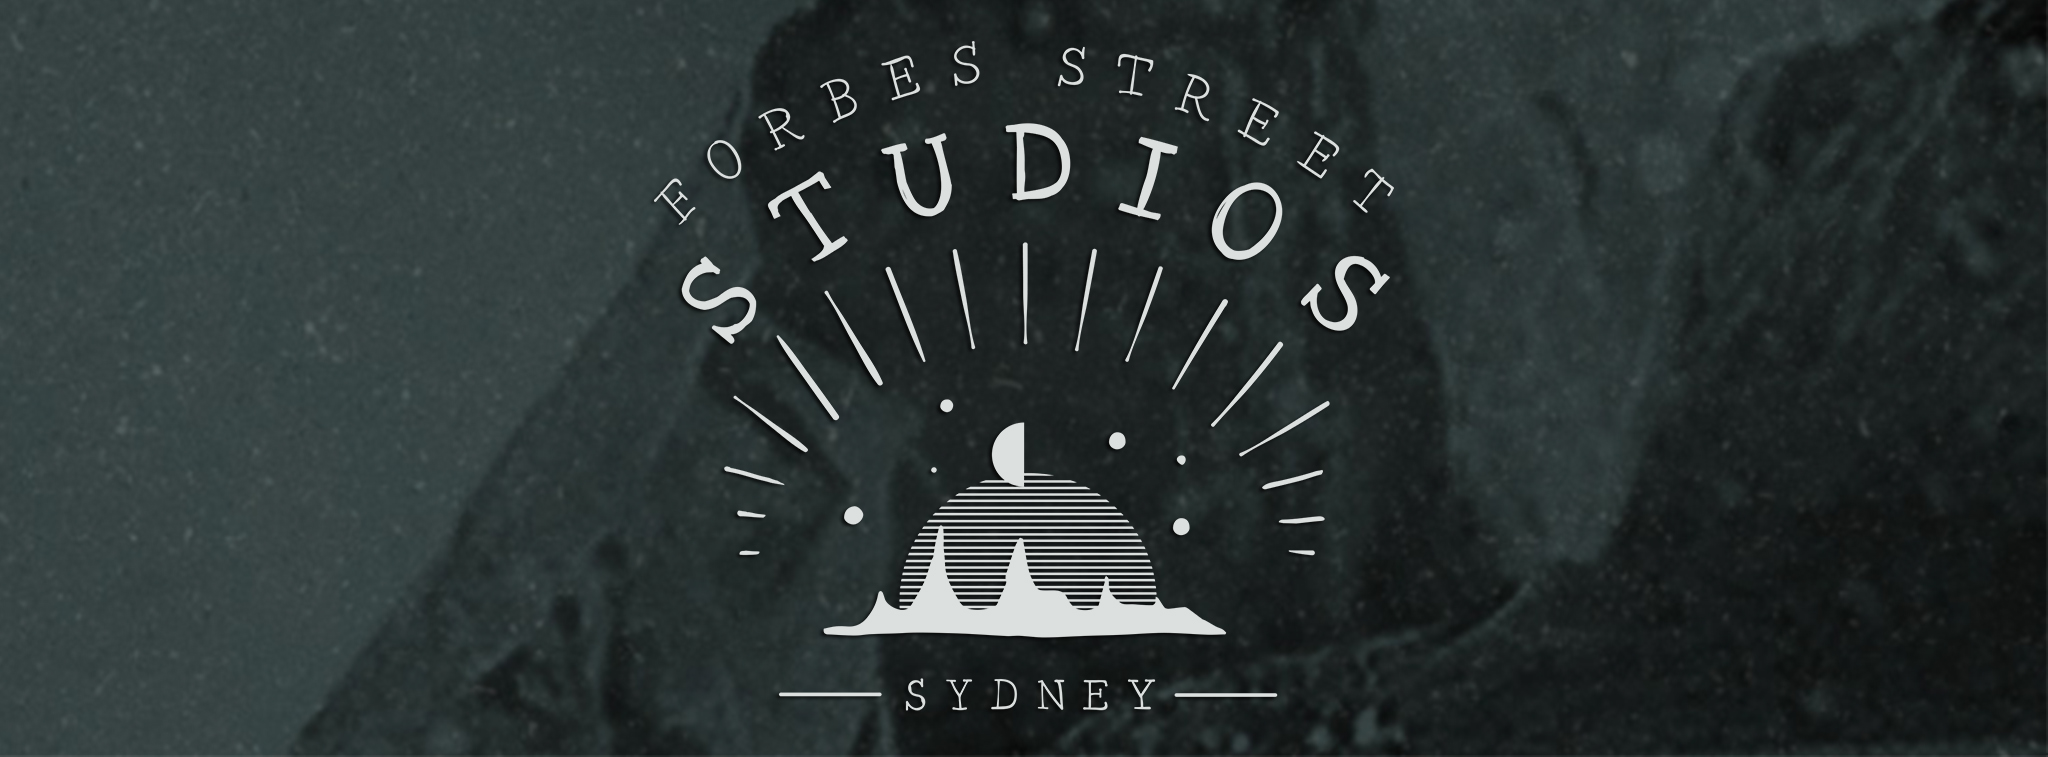 UMA’s Michael Taylor walks us through the just-launched Forbes Street Studios